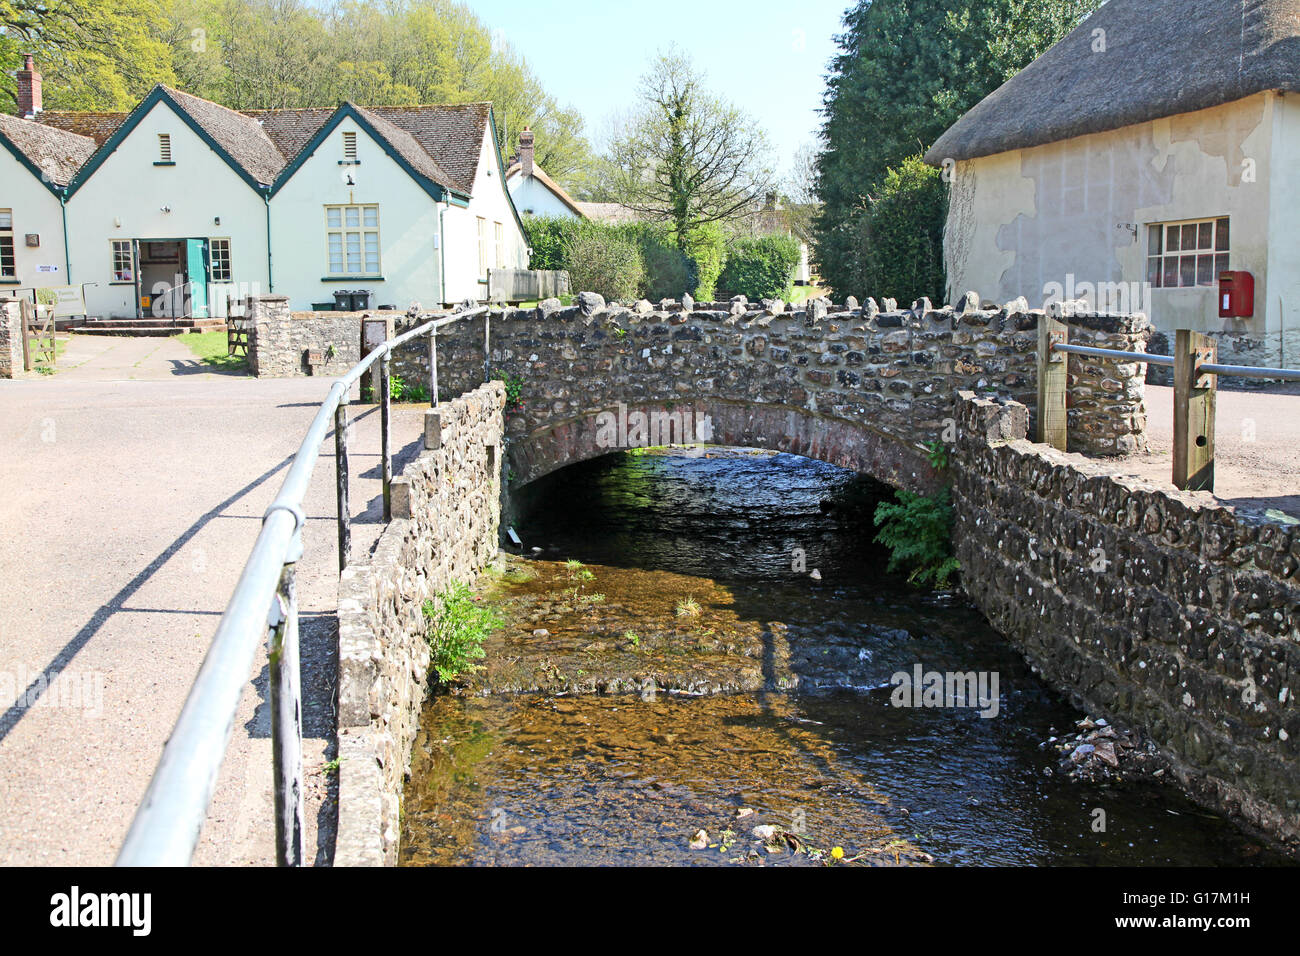 A quaint picture postcard Devon Village, with thatched cottages and a small stream running through. Stock Photo